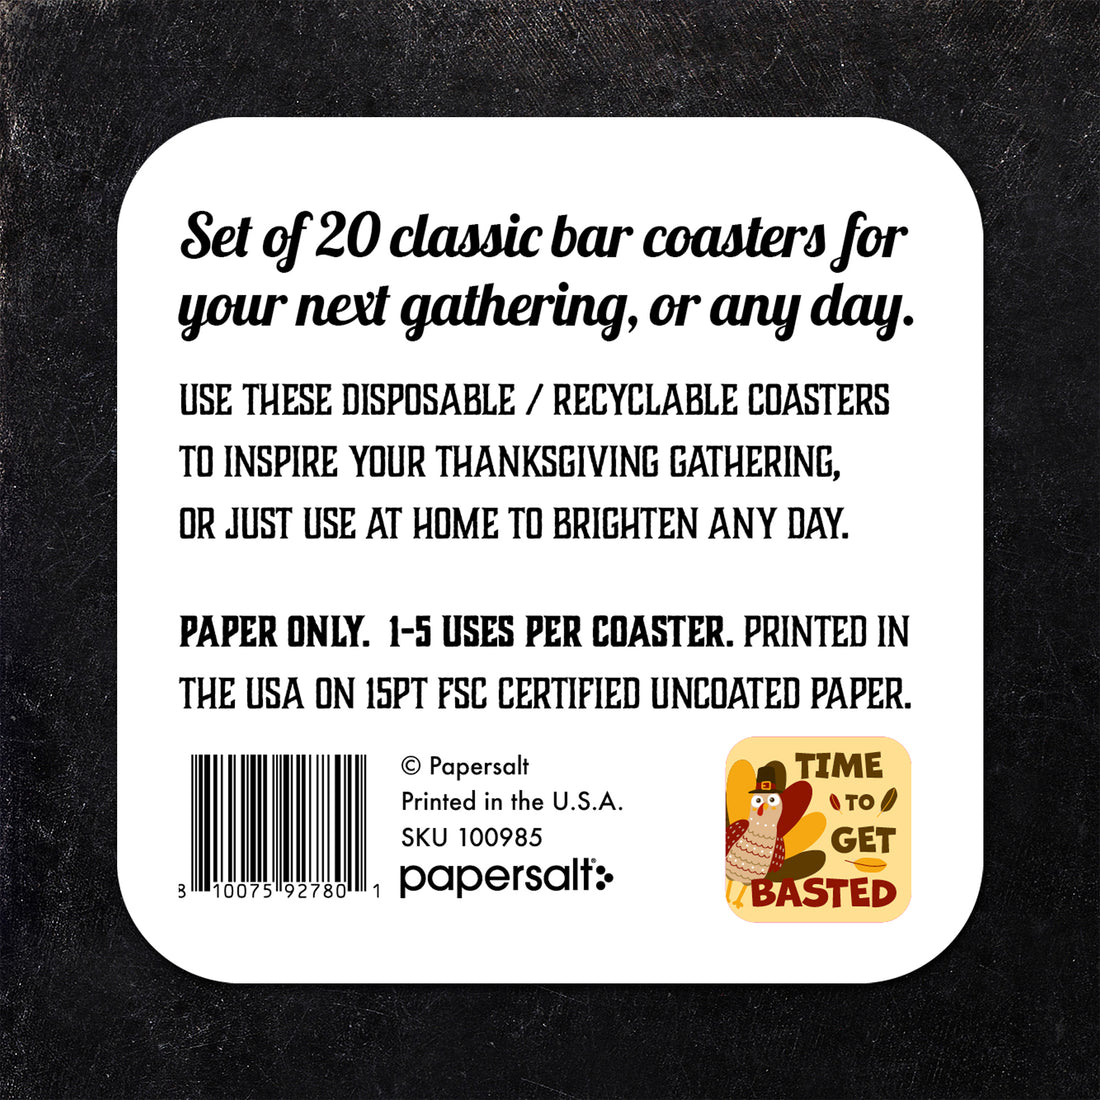 Coaster: Holiday, Thanksgiving Time to Get Basted - Pack of 6